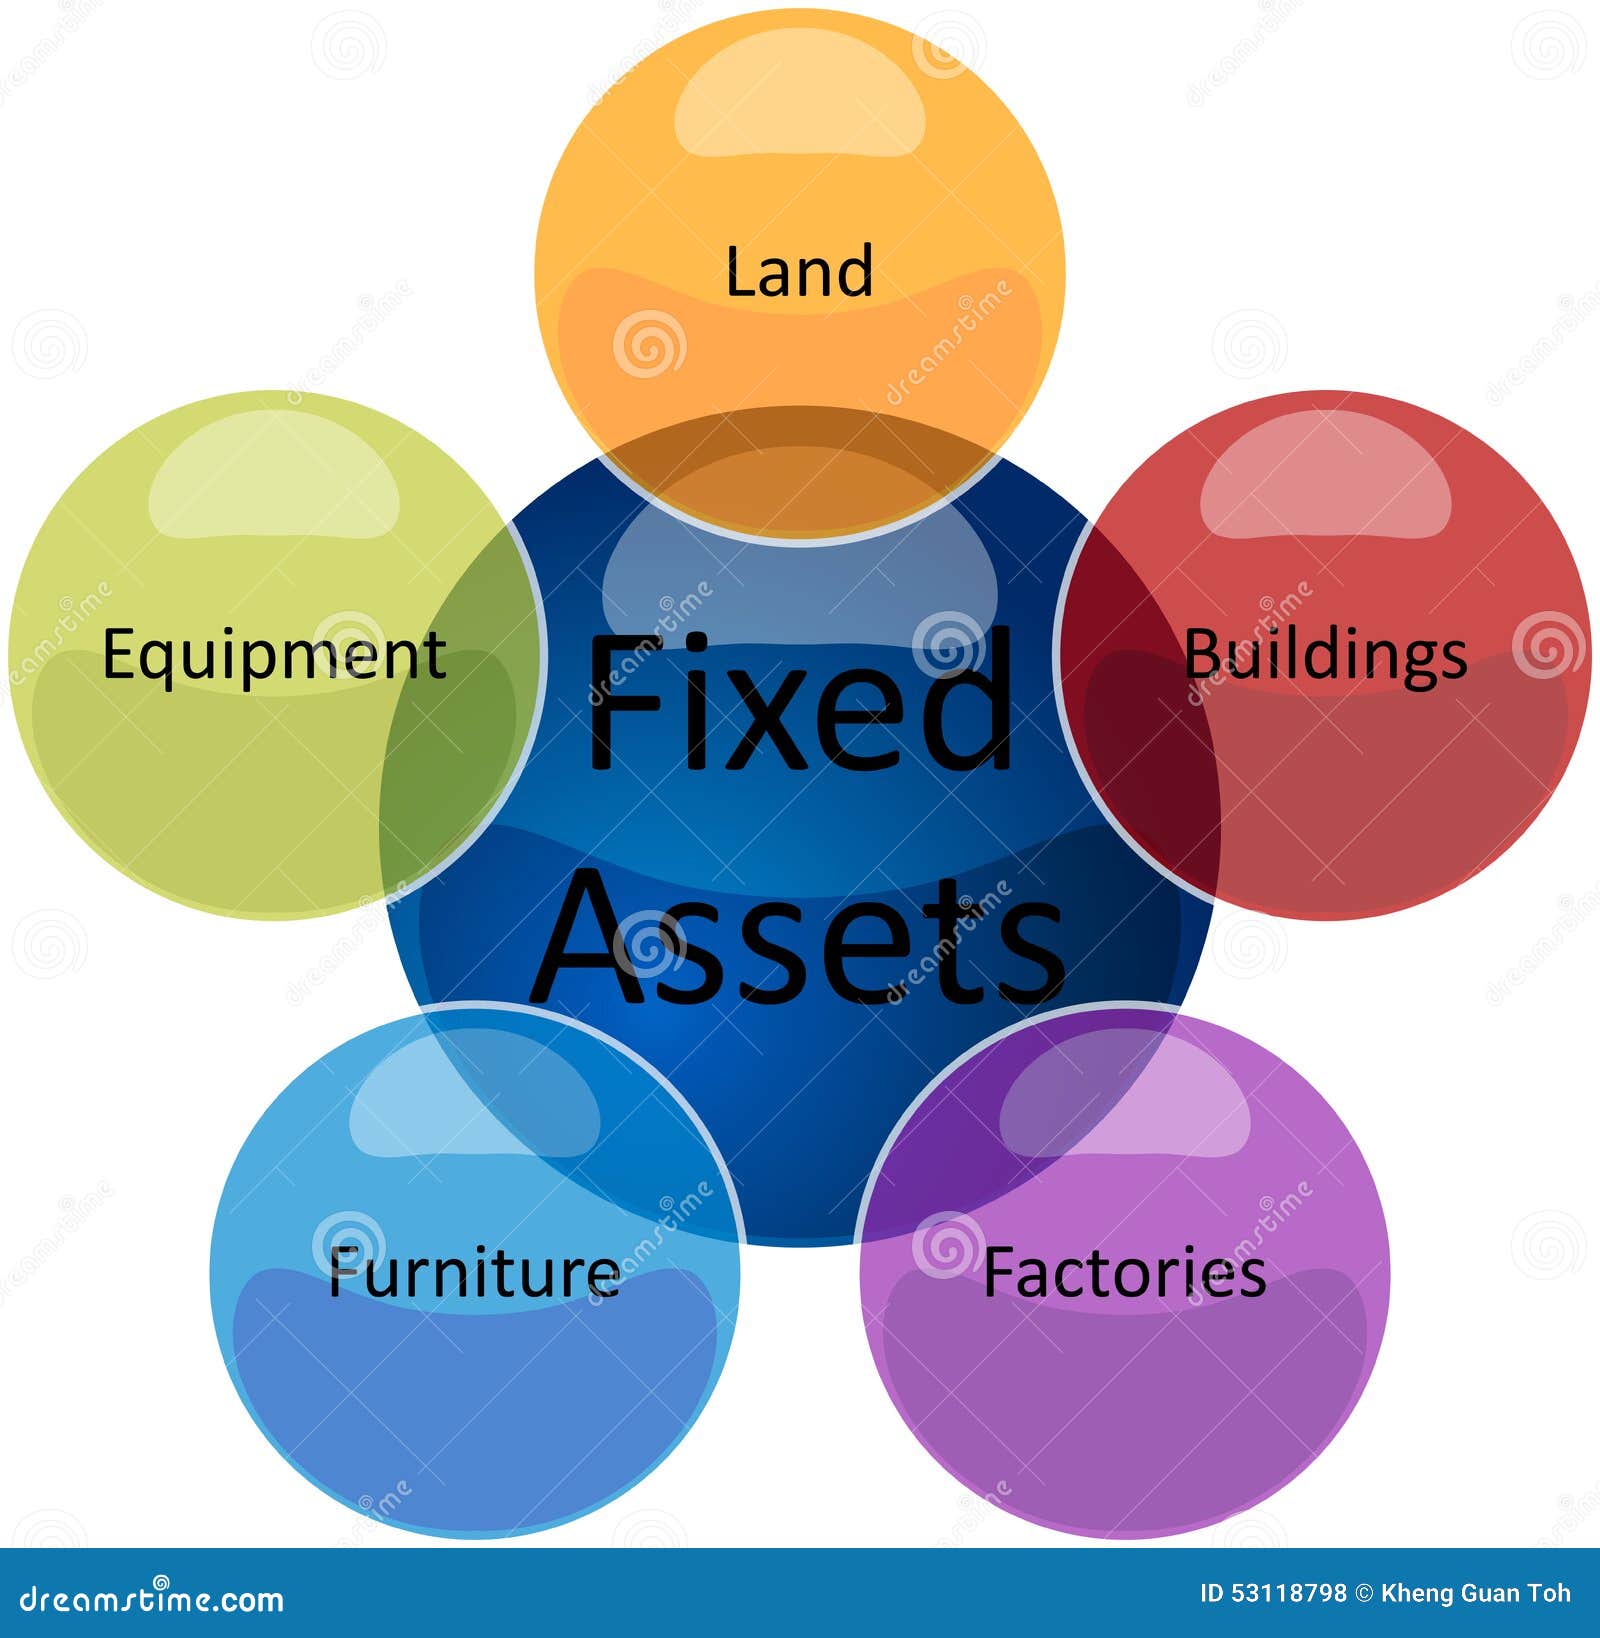 What Are Tangible Assets in Business?